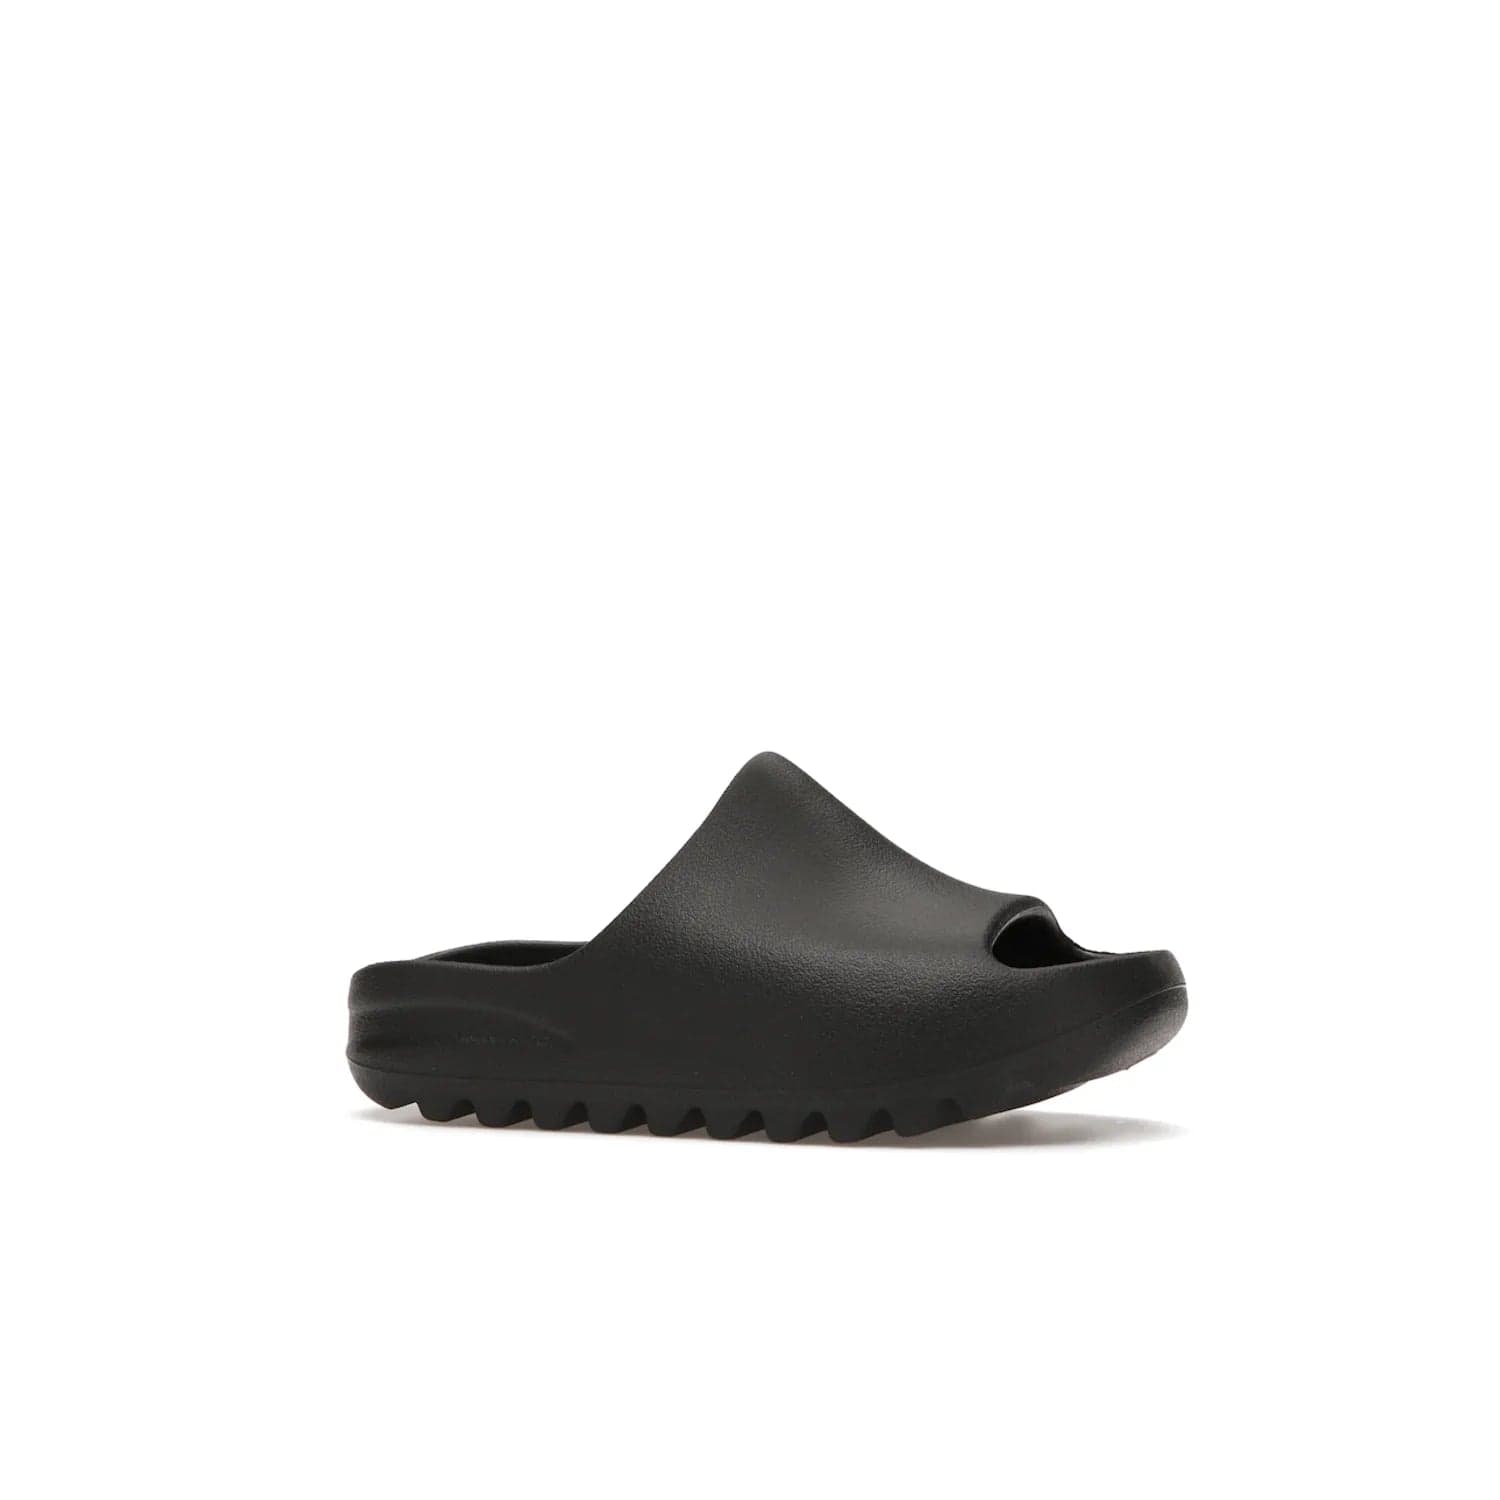 adidas Yeezy Slide Onyx (Kids) - Image 3 - Only at www.BallersClubKickz.com - adidas Yeezy Slide Onyx (Kids): Comfortable foam construction with textured surface and iconic three-stripe logo. Breathable, open-toe design and deep grooves for traction. Released in March 2021 at $50.